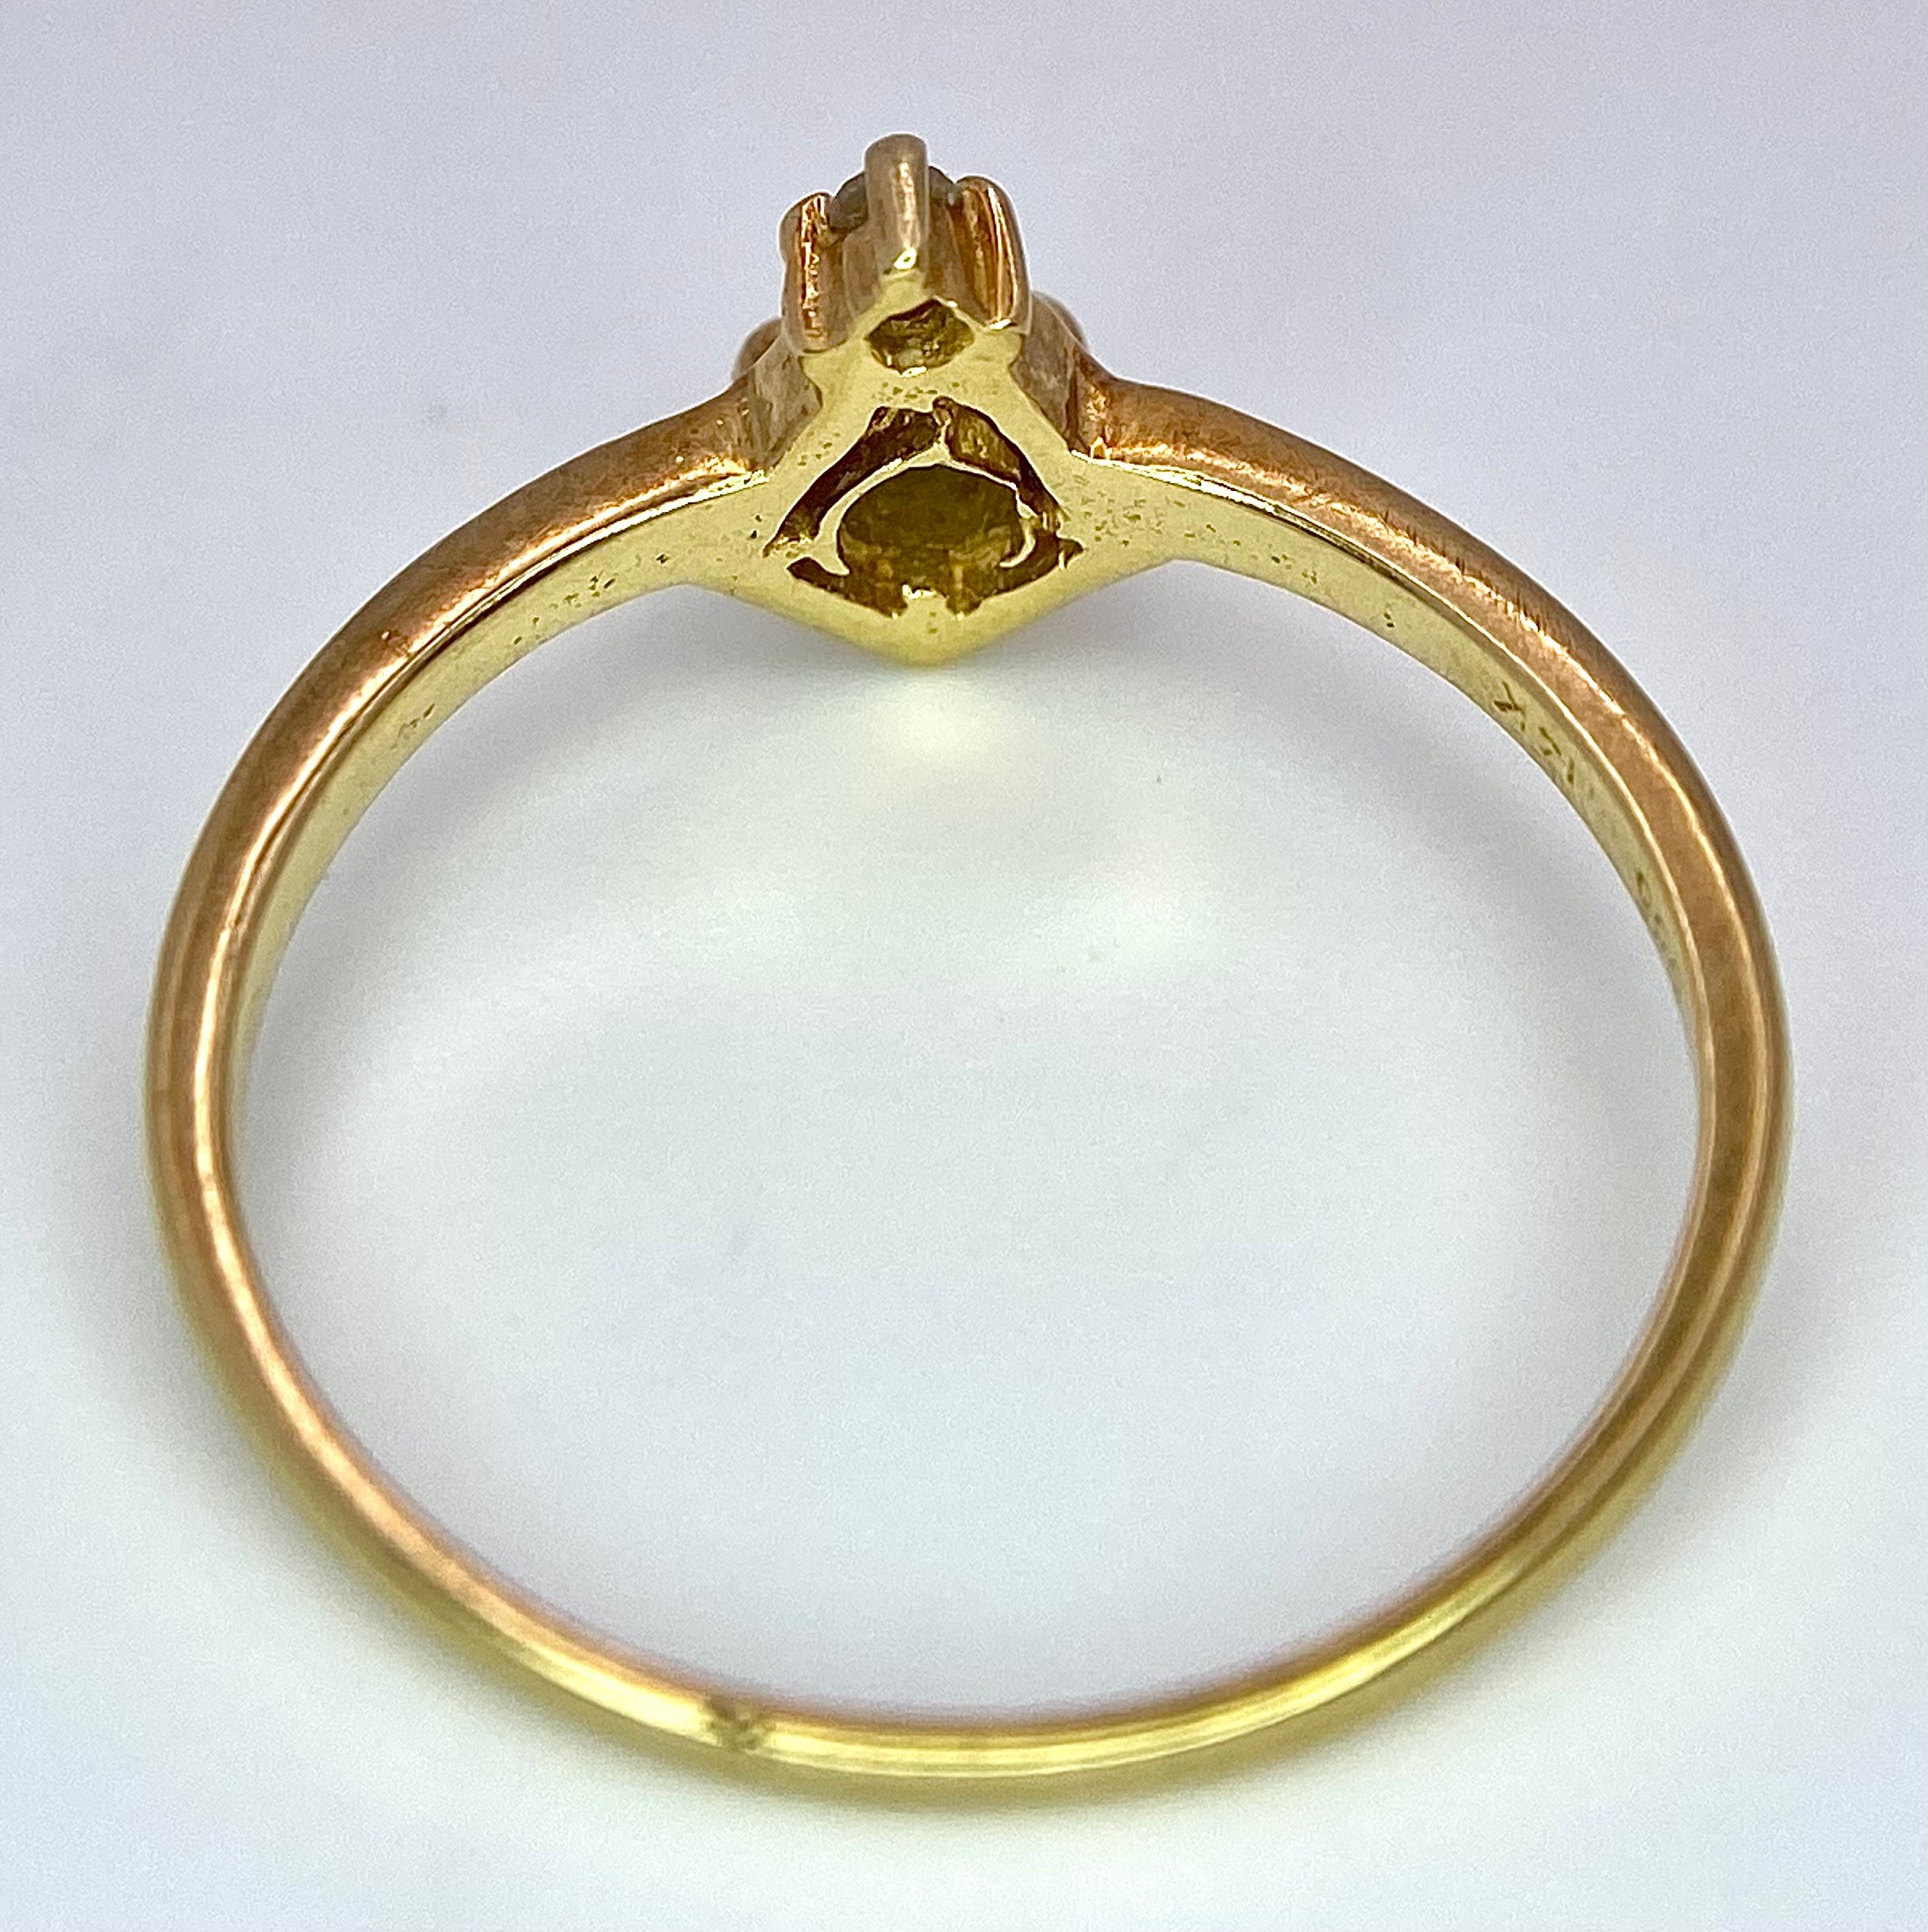 A14K YELLOW GOLD PERIDOT & DIAMOND RING. Size K/L, 1.4g total weight. Ref: SC 9030 - Image 5 of 6